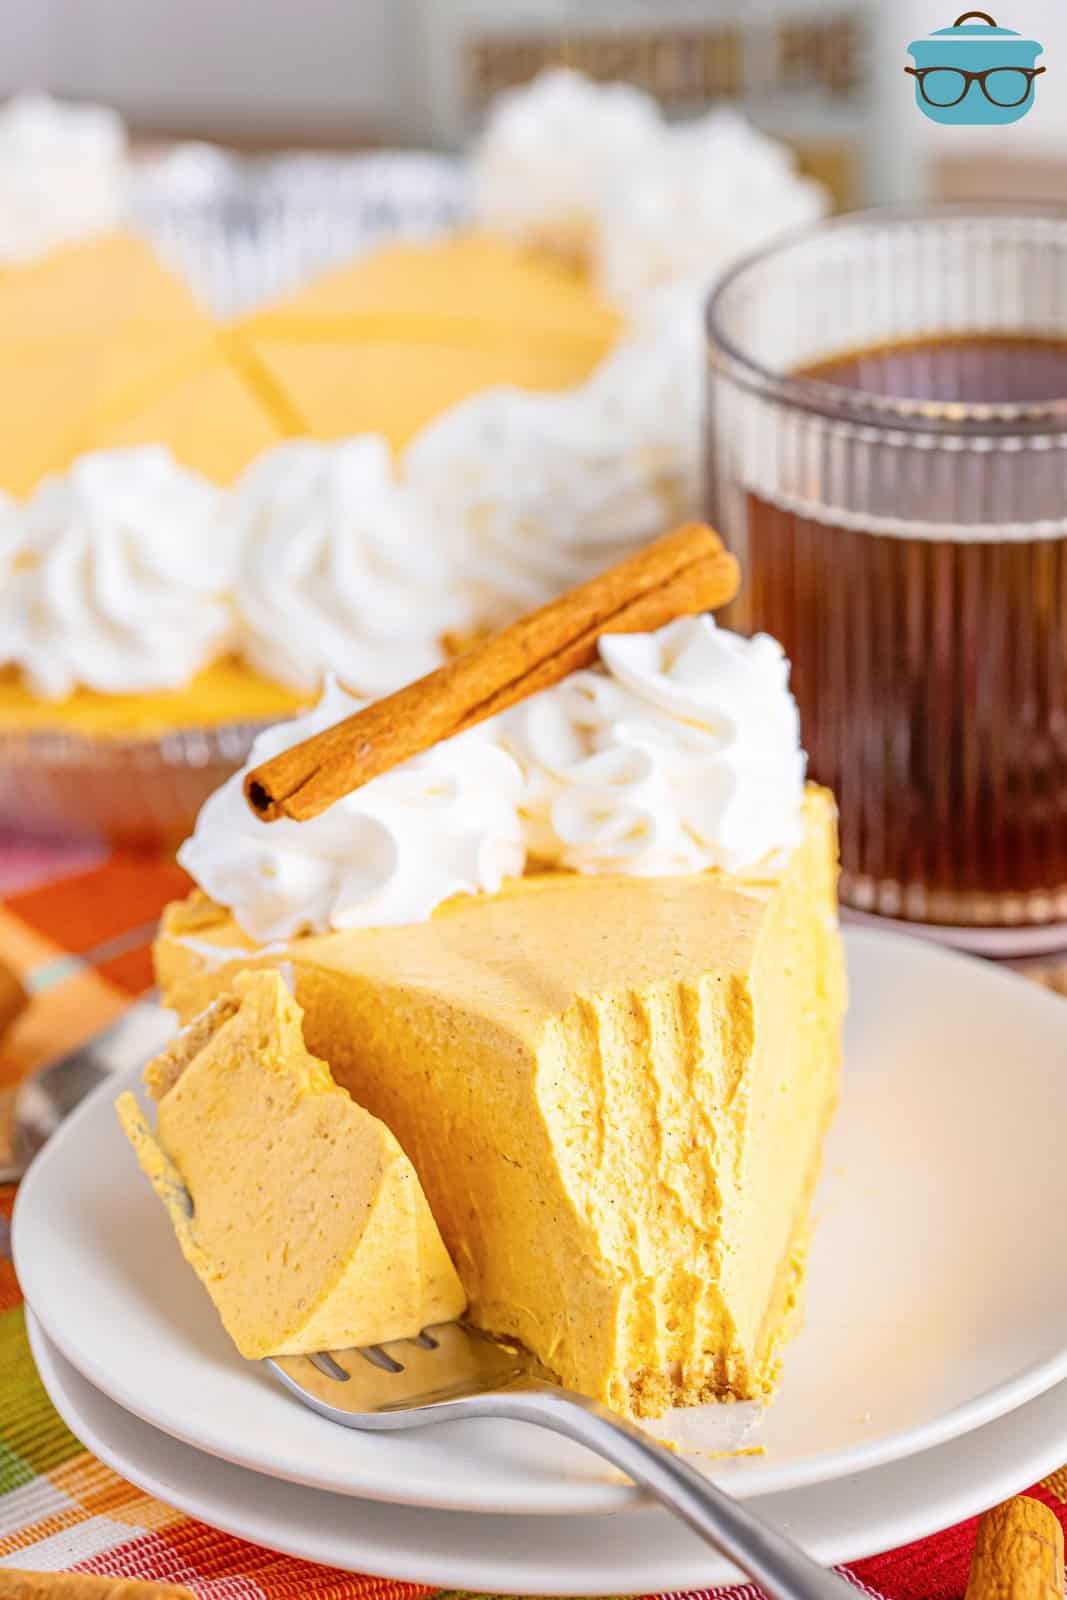 A fork holding a bite of No Bake Pumpkin Cheesecake next to the rest of the slice on a plate.